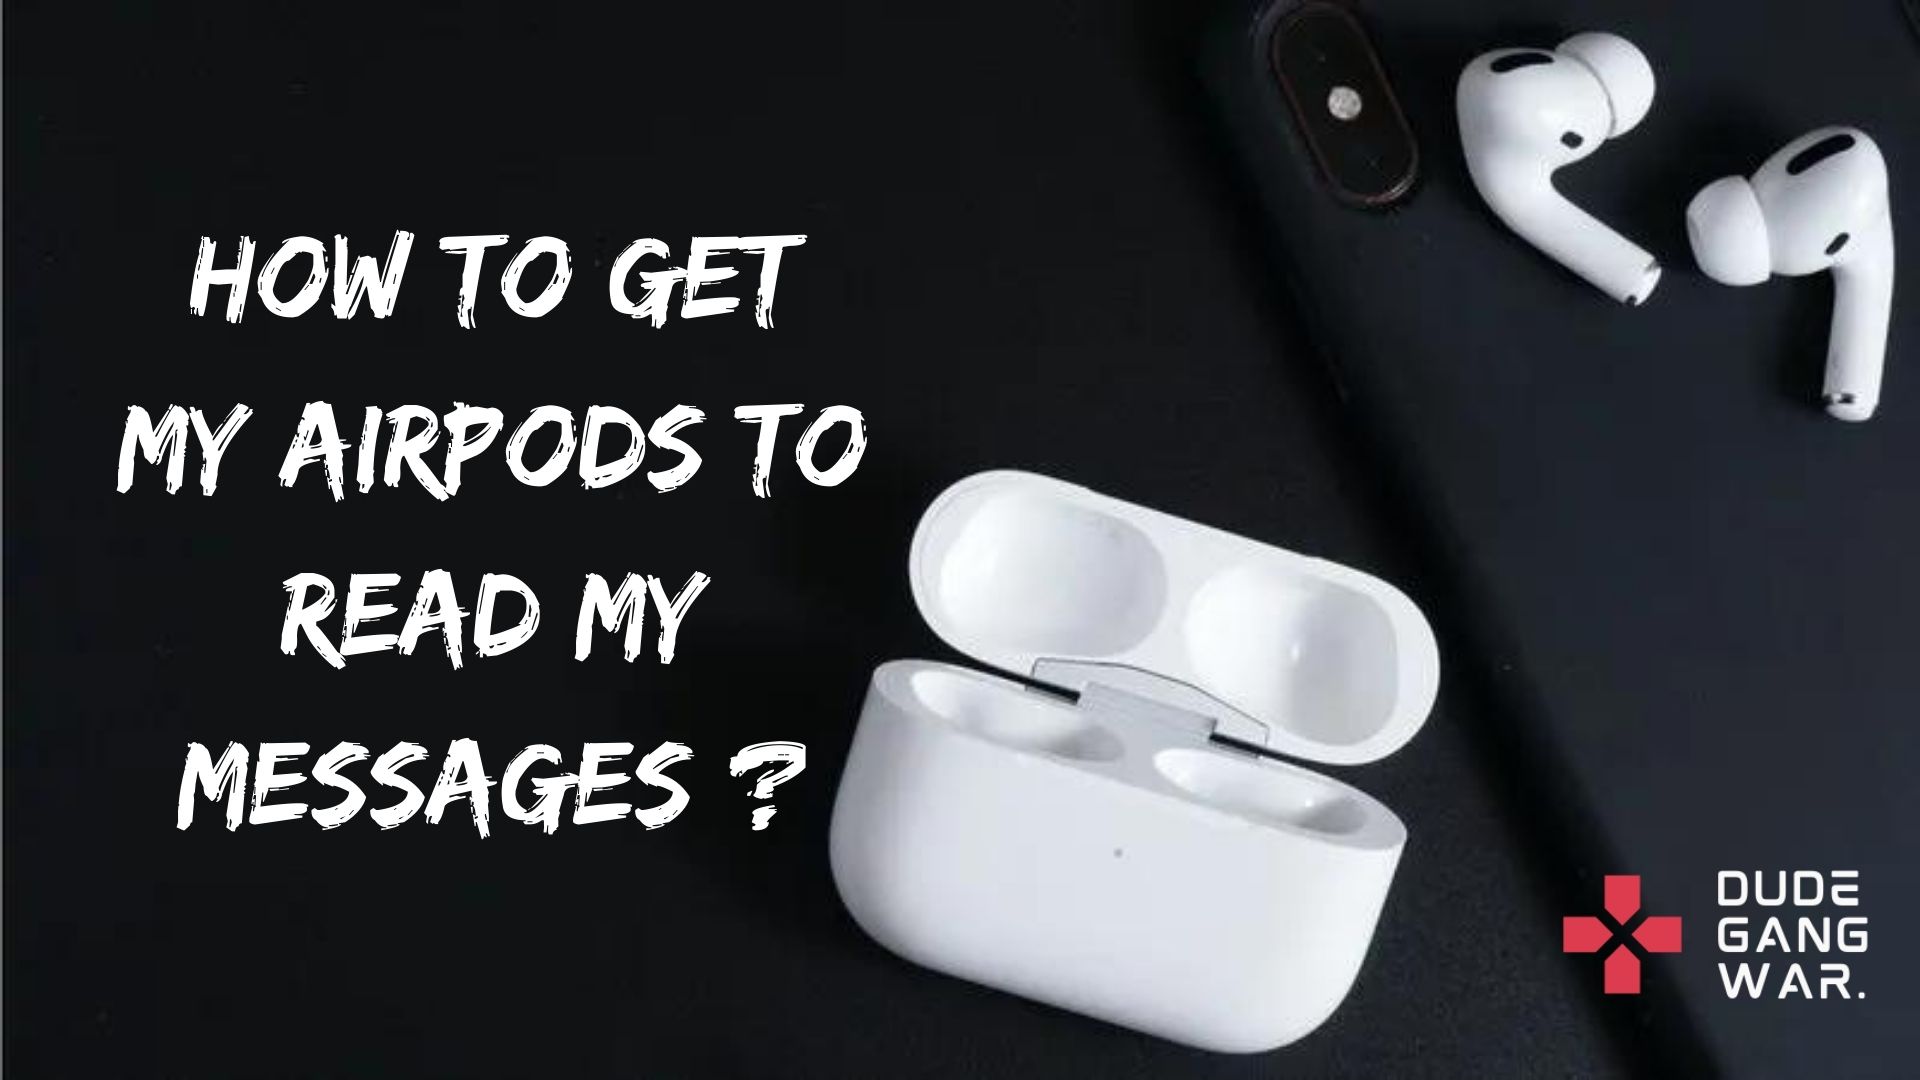 How Do I Get AirPods To Read My Texts